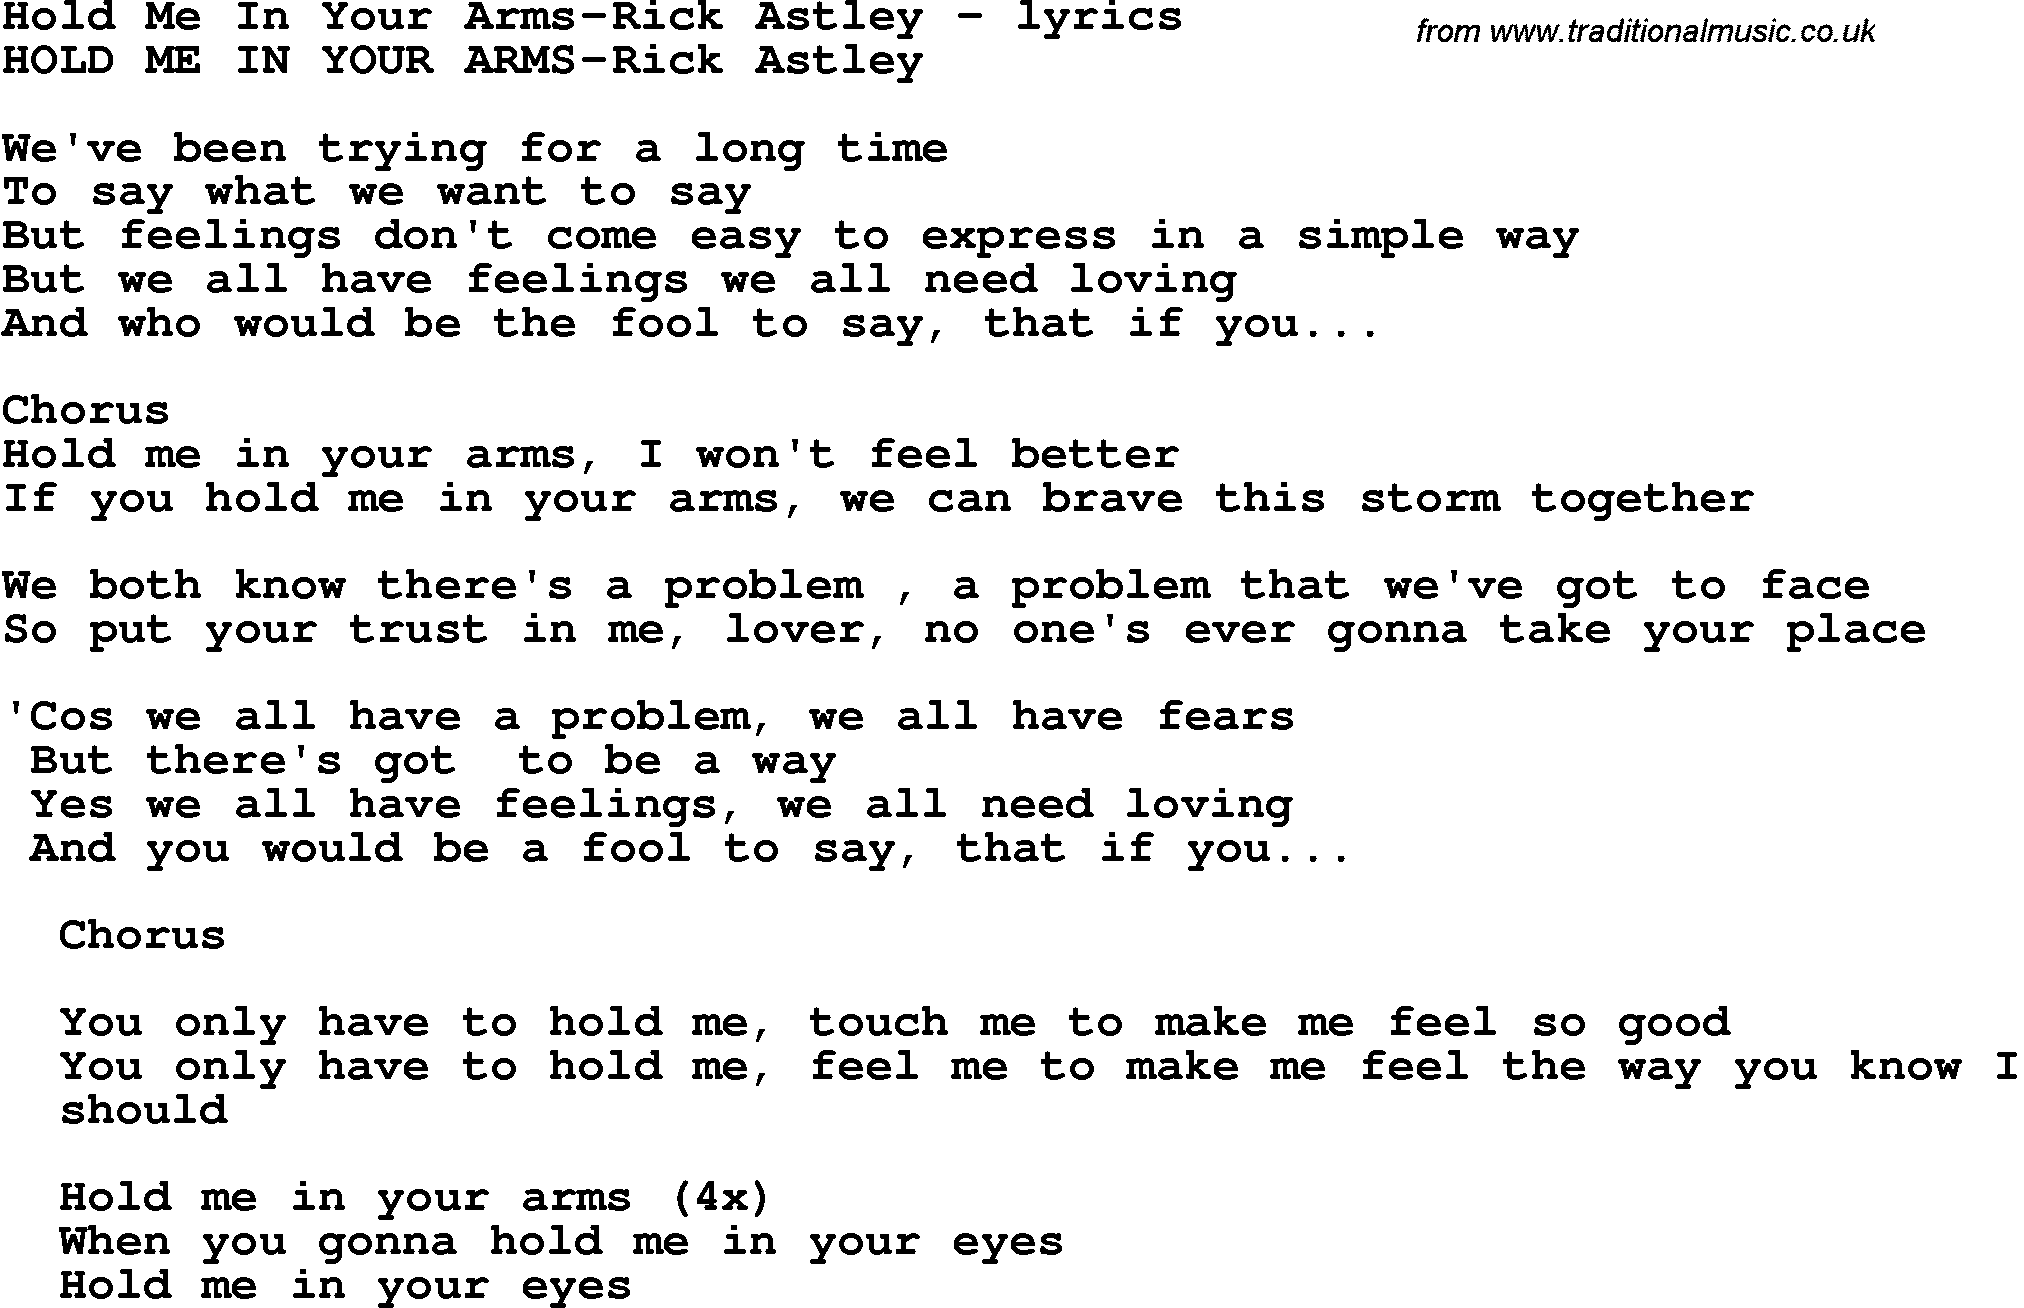 Love Song Lyrics for: Hold Me In Your Arms-Rick Astley